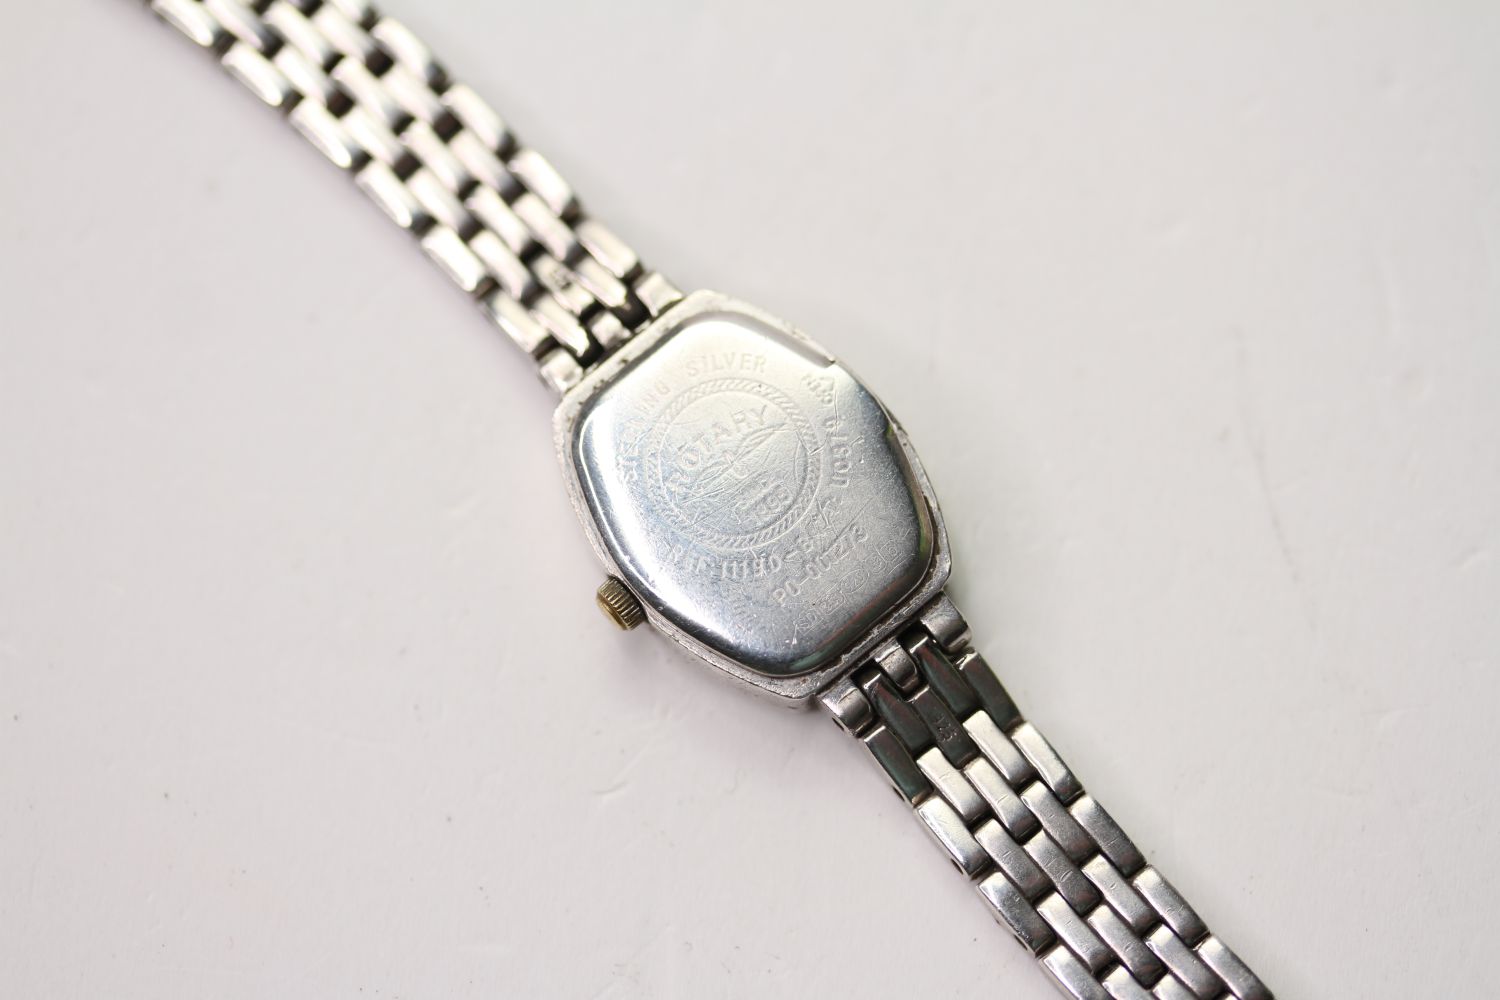 ROTARY WRISTWATCH REF 11190 W/BOX, mother of pearl dial, 17mm sterling silver case with snap case - Image 3 of 5